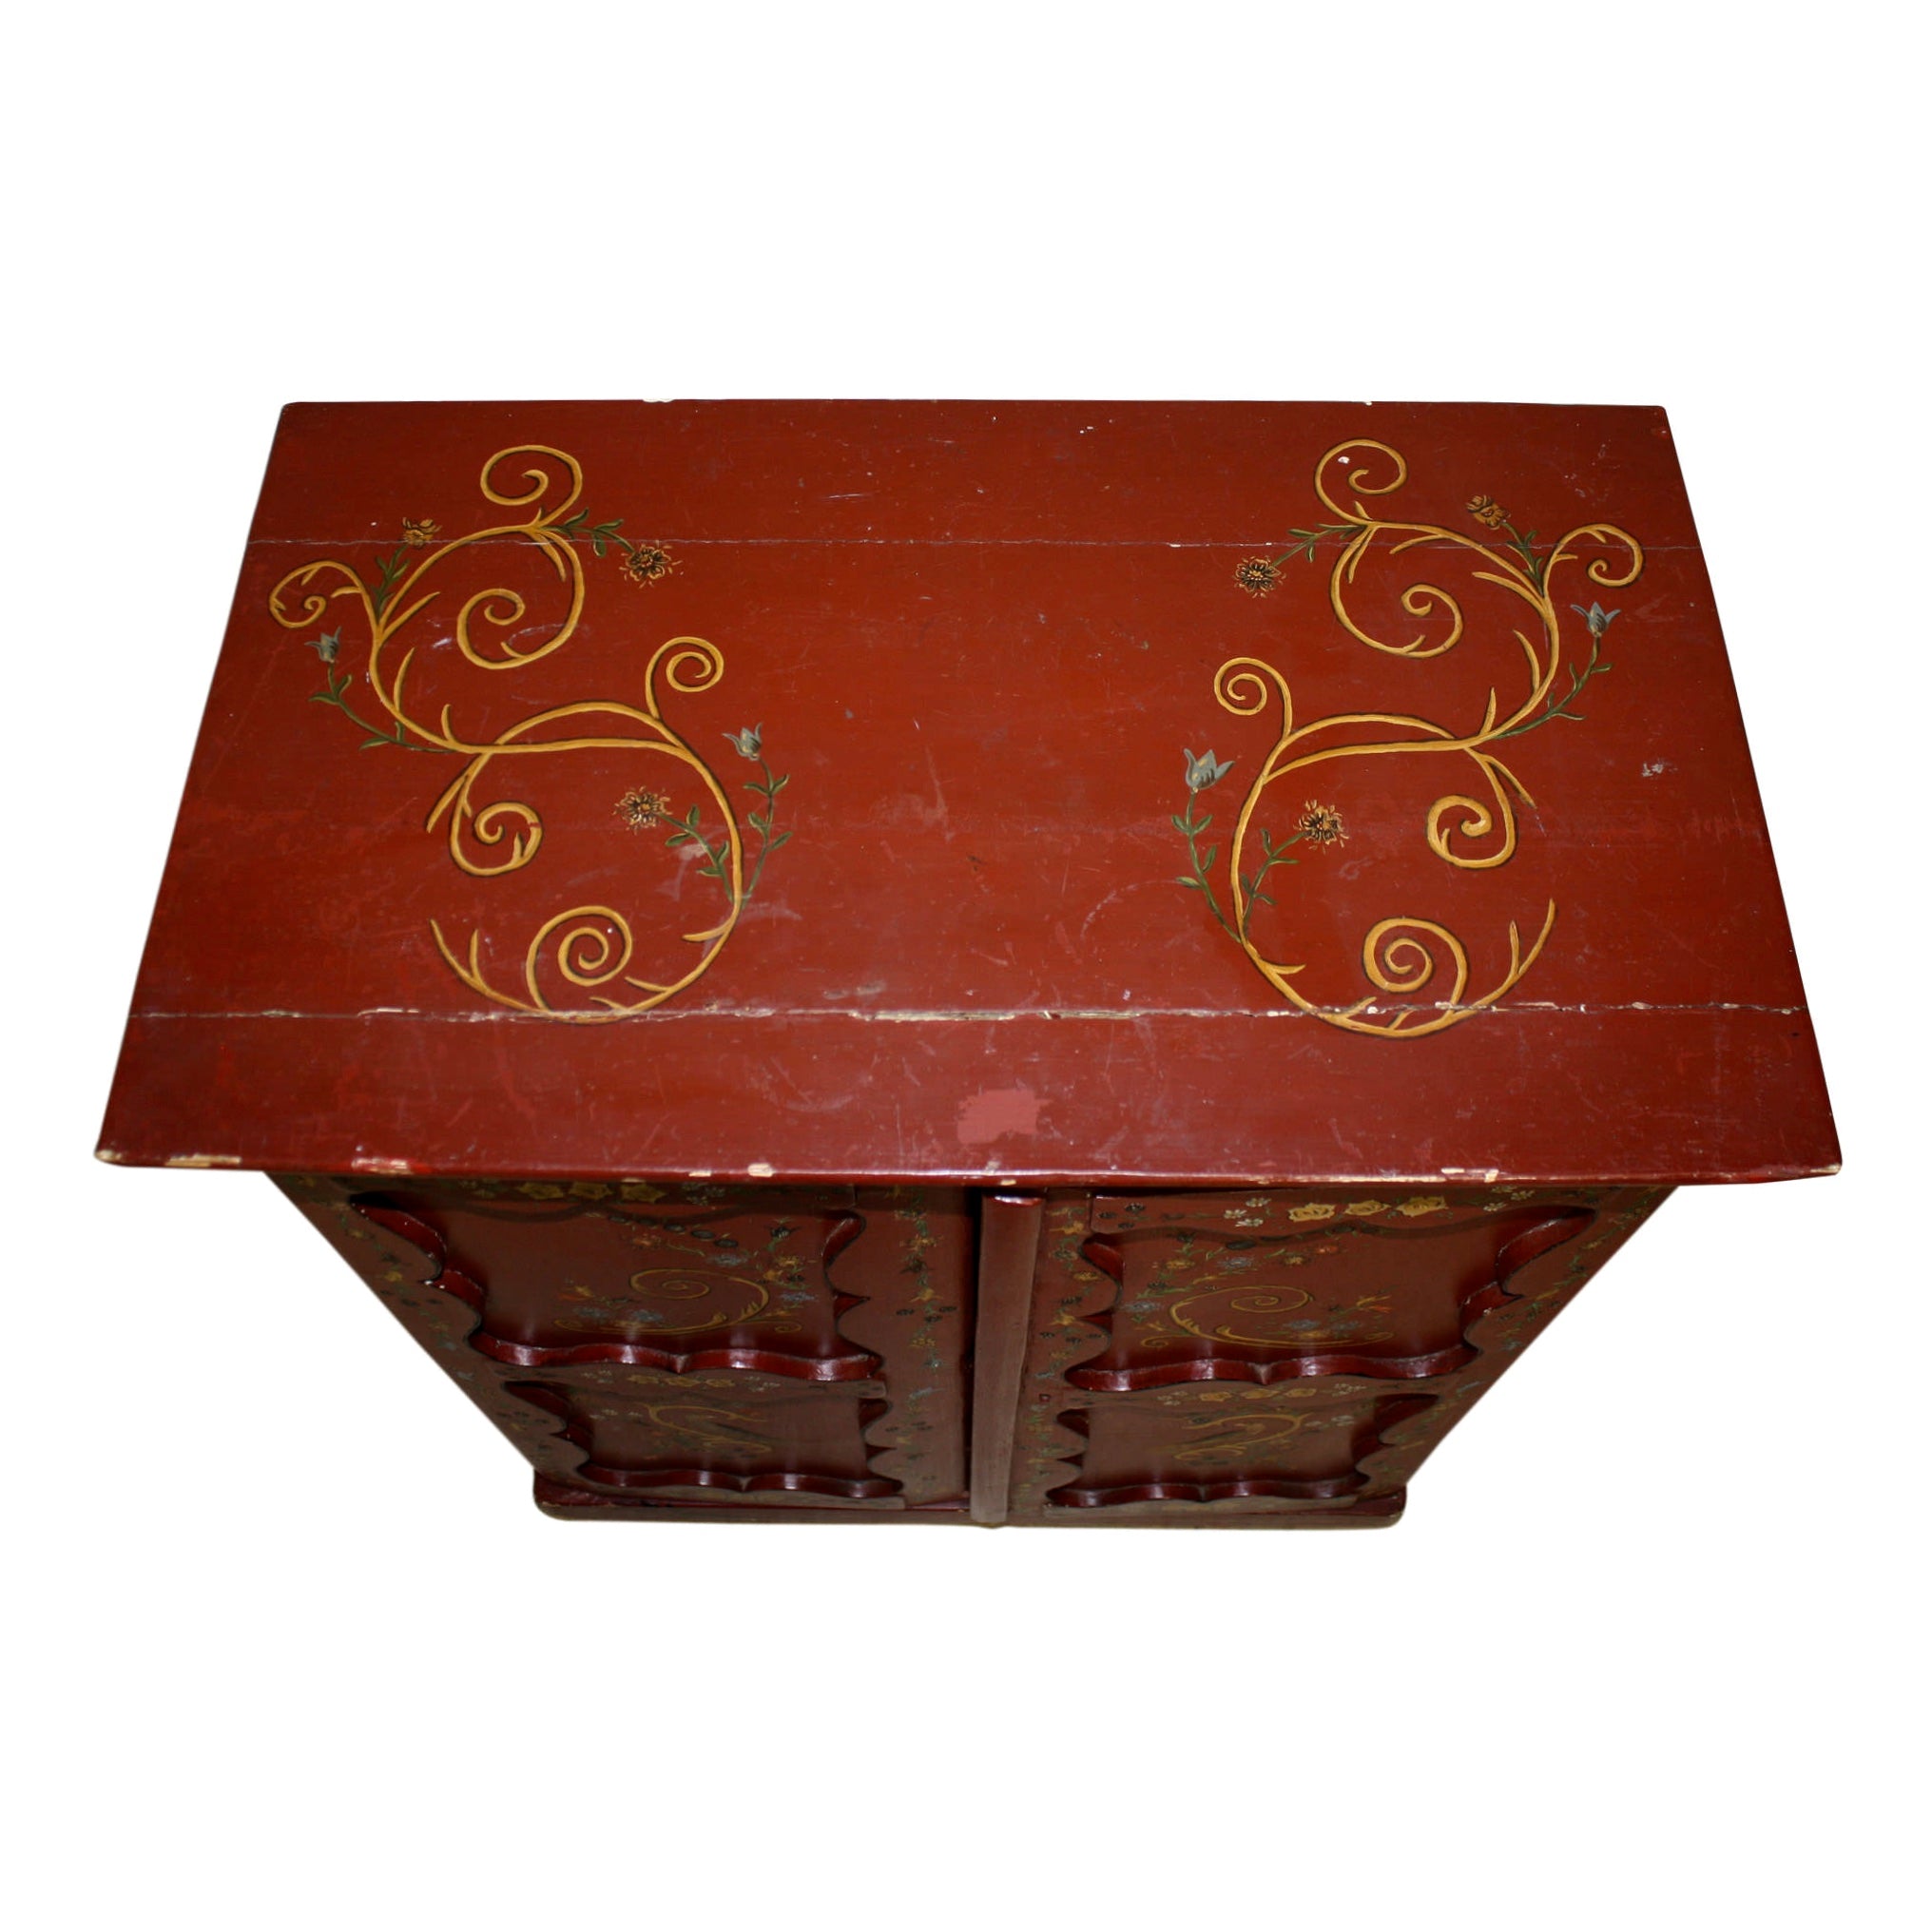 Dutch Red Painted Cabinet